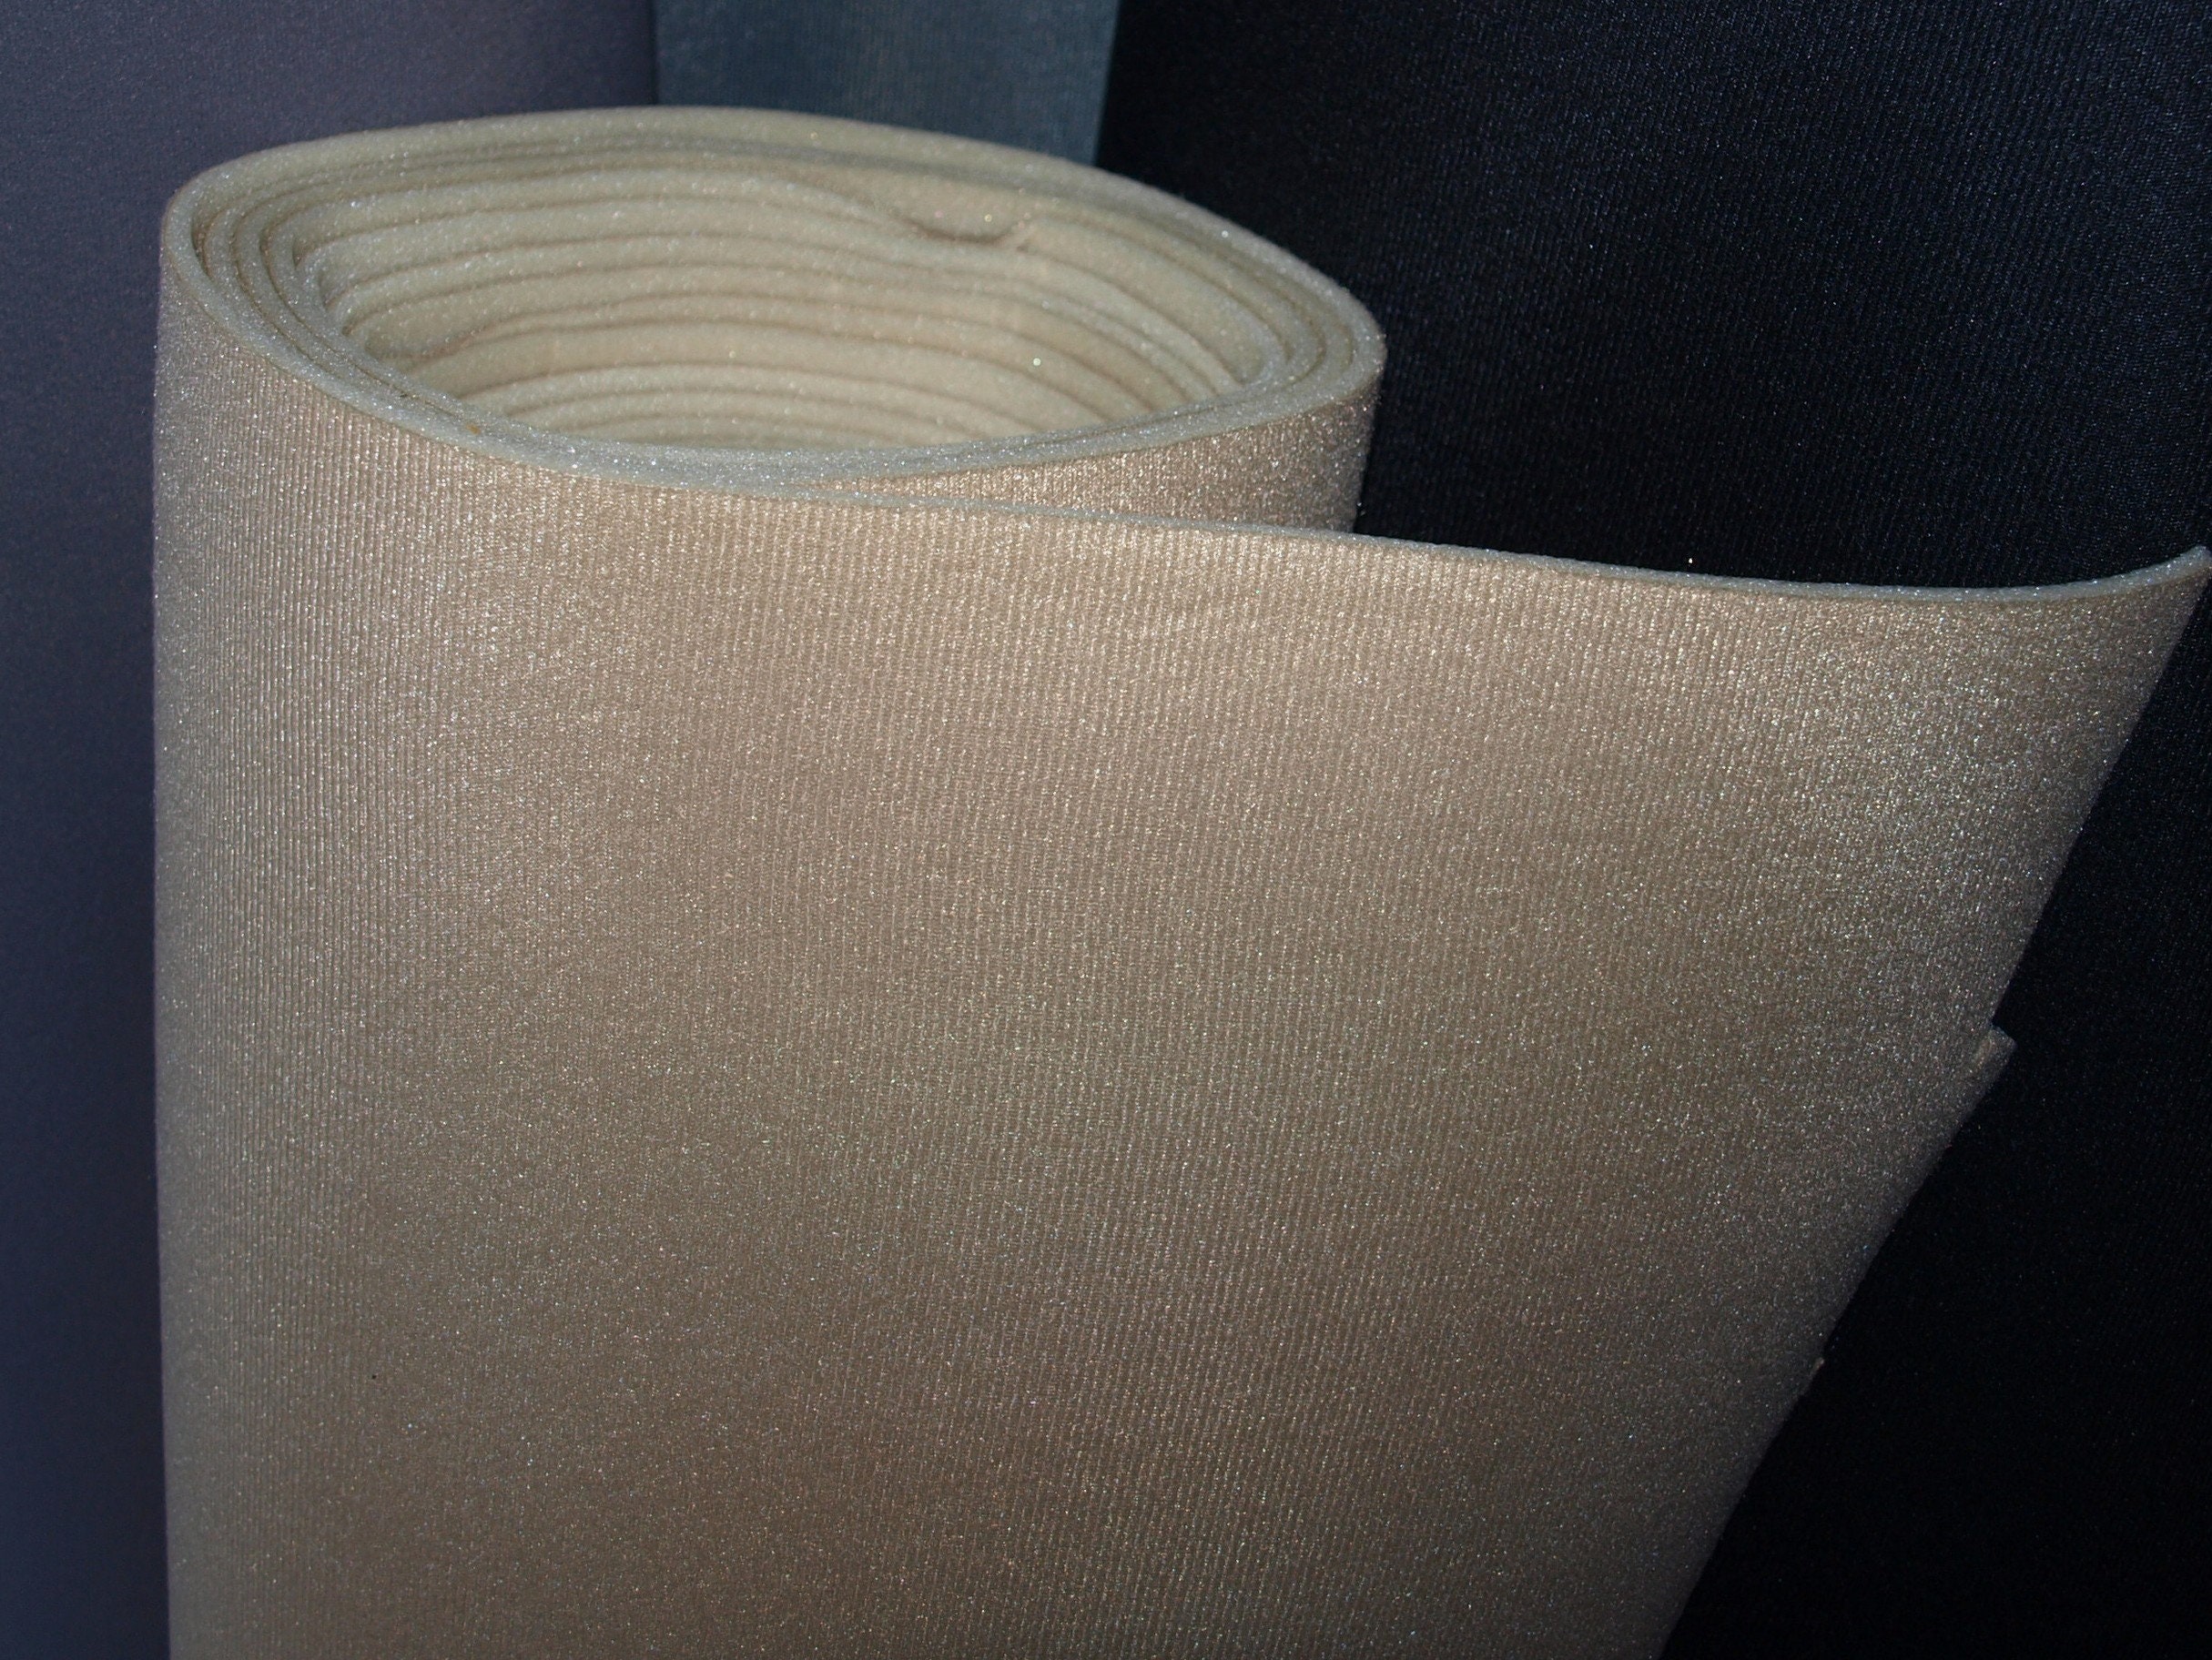 Foam Padding (Sold by Continuous Yard) - Made in USA (1 Inch)